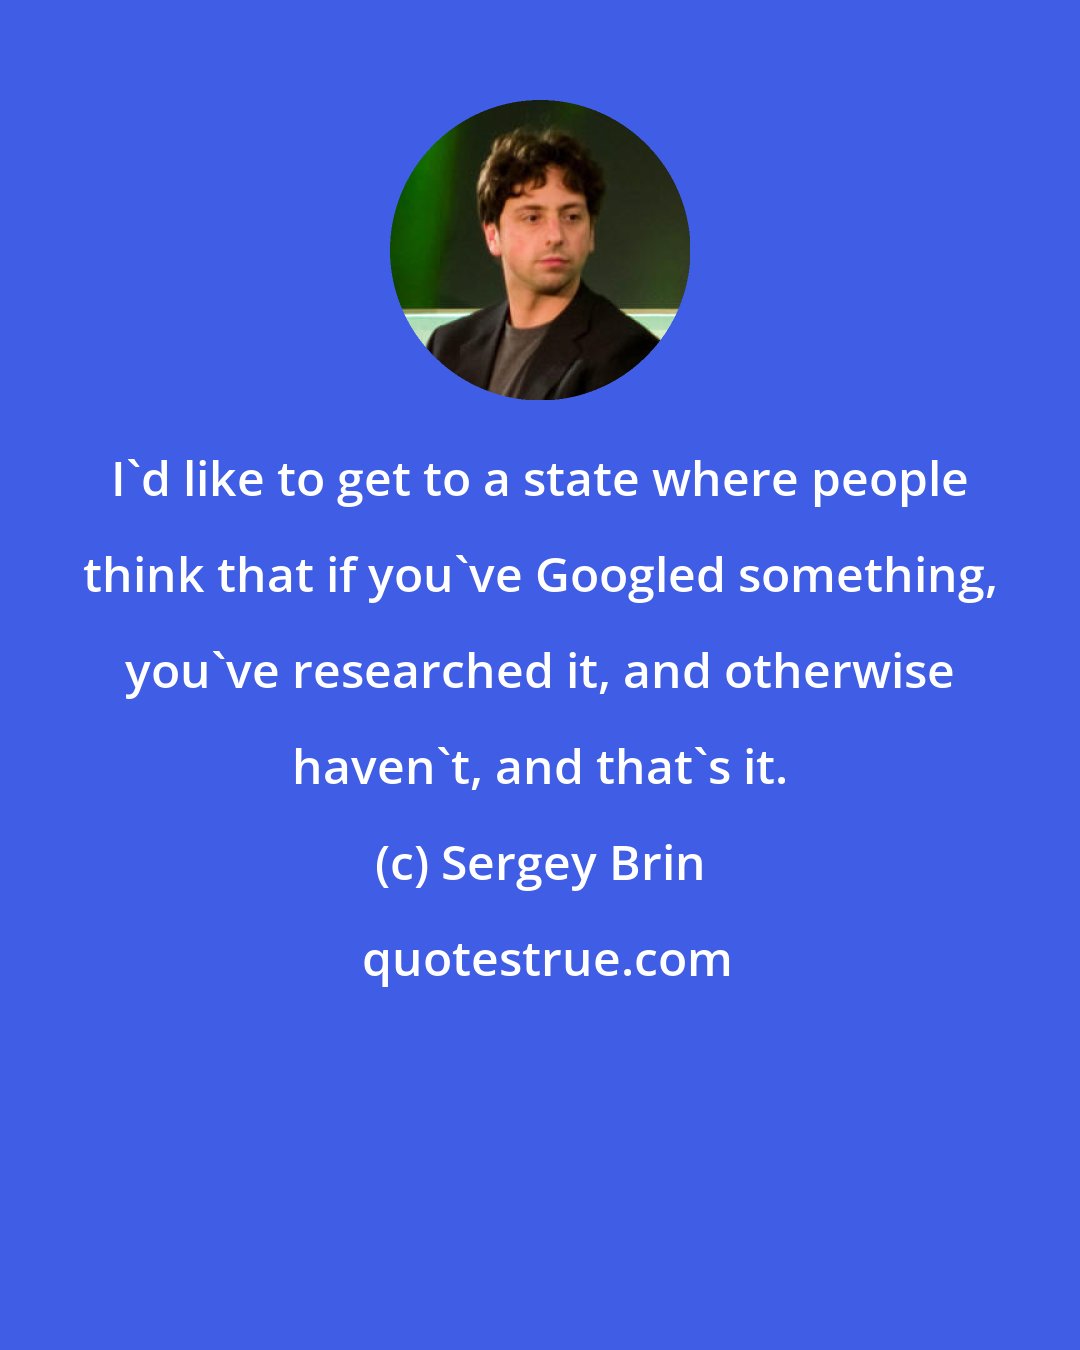 Sergey Brin: I'd like to get to a state where people think that if you've Googled something, you've researched it, and otherwise haven't, and that's it.